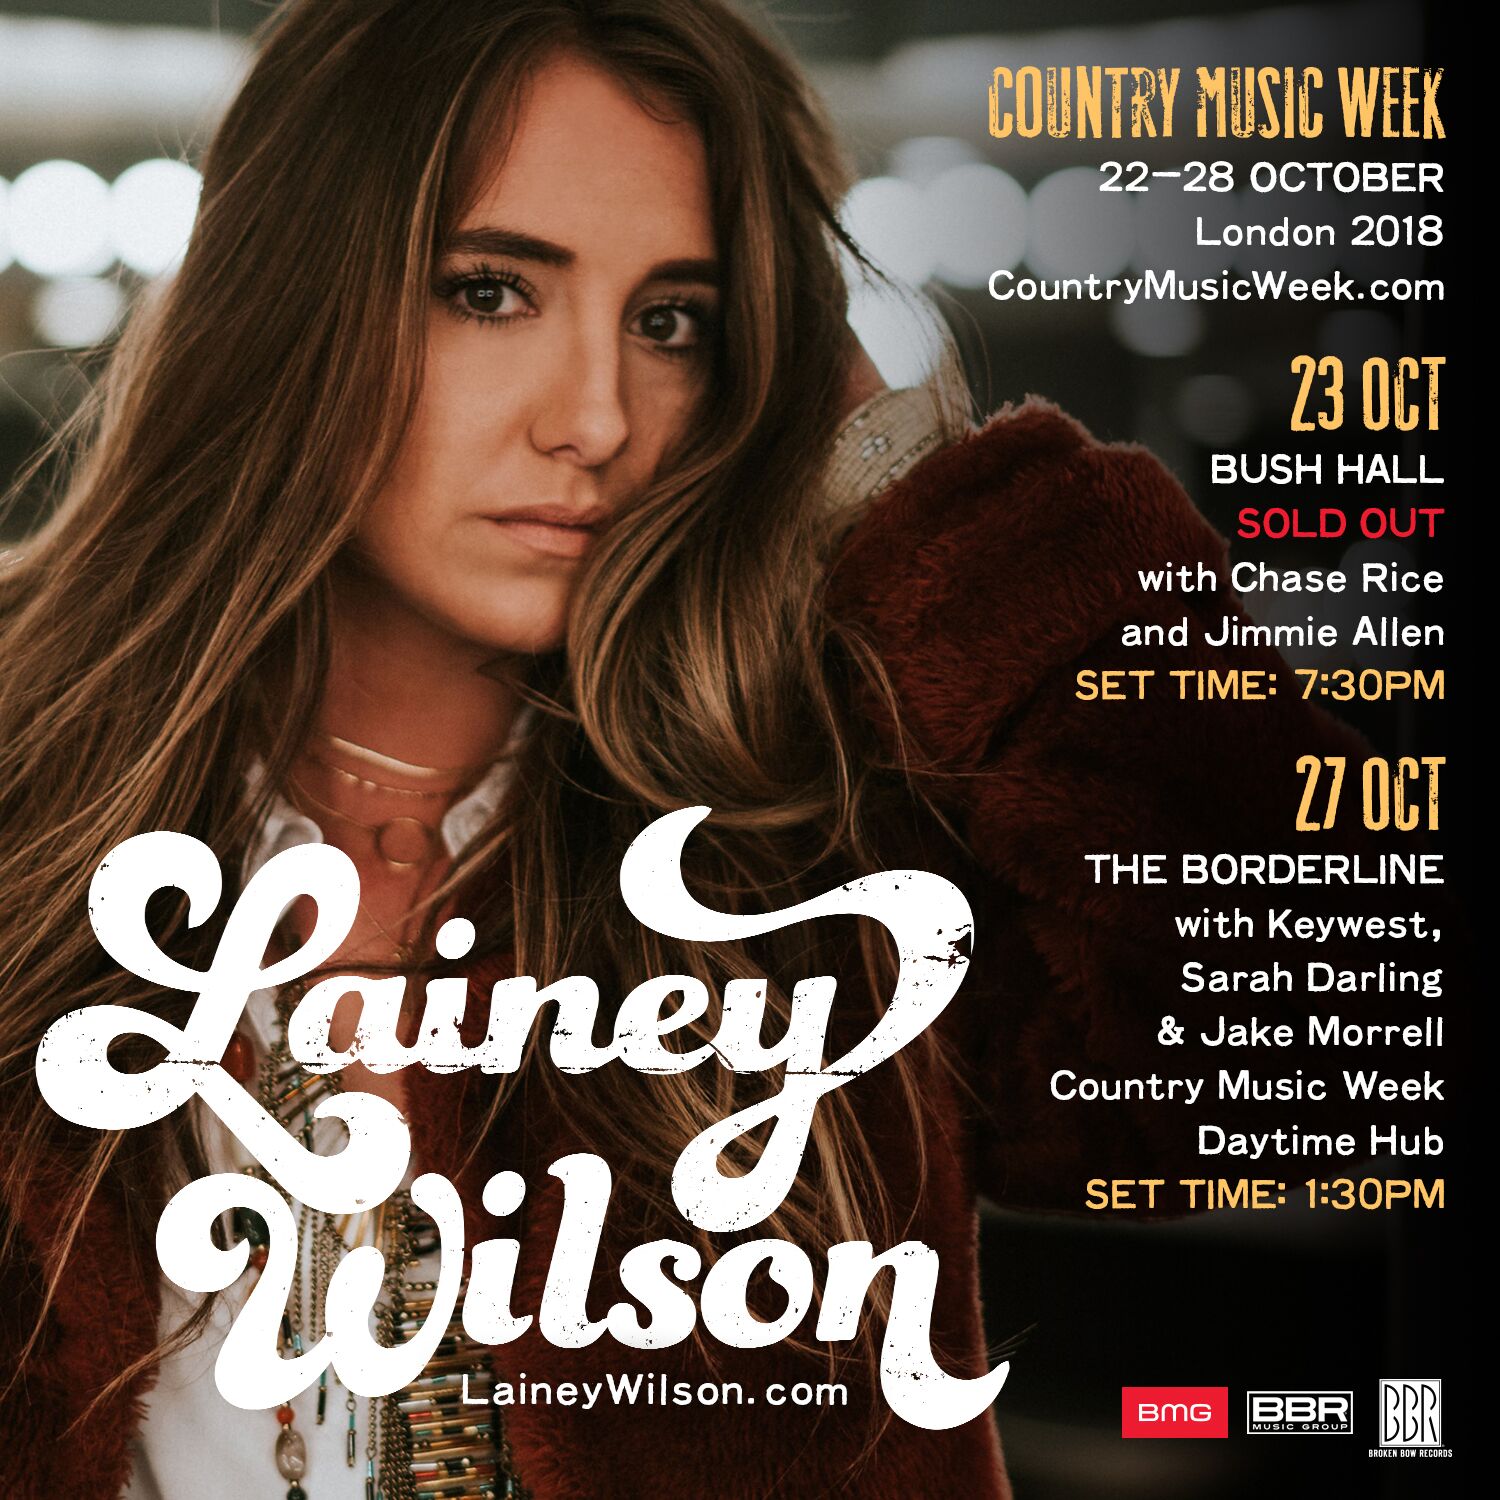 American new comer Lainey Wilson set for UK Country Music NI